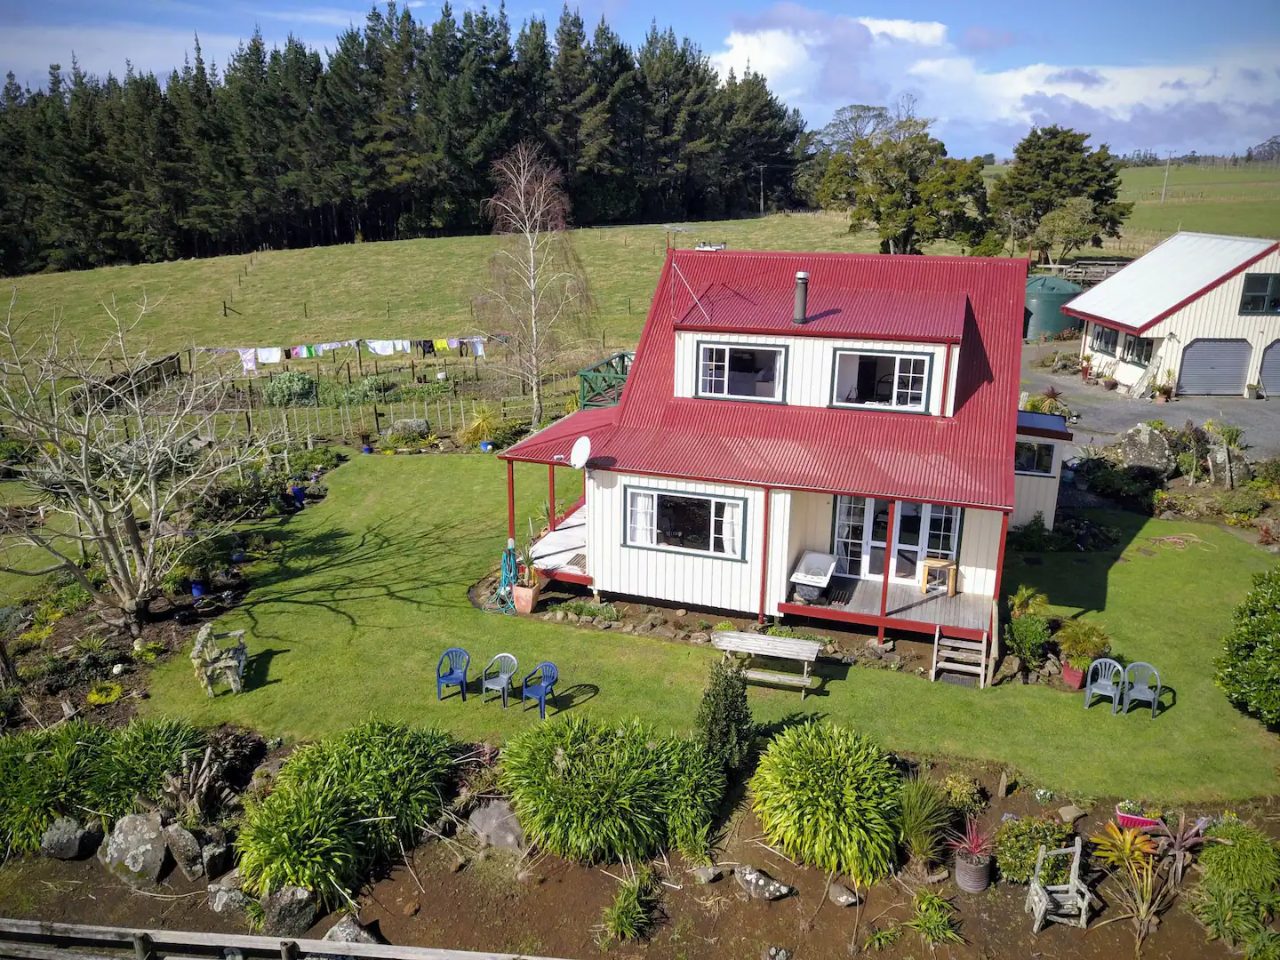 From tiny homes to chalets: Here are New Zealand’s Top Ten Airbnb stays